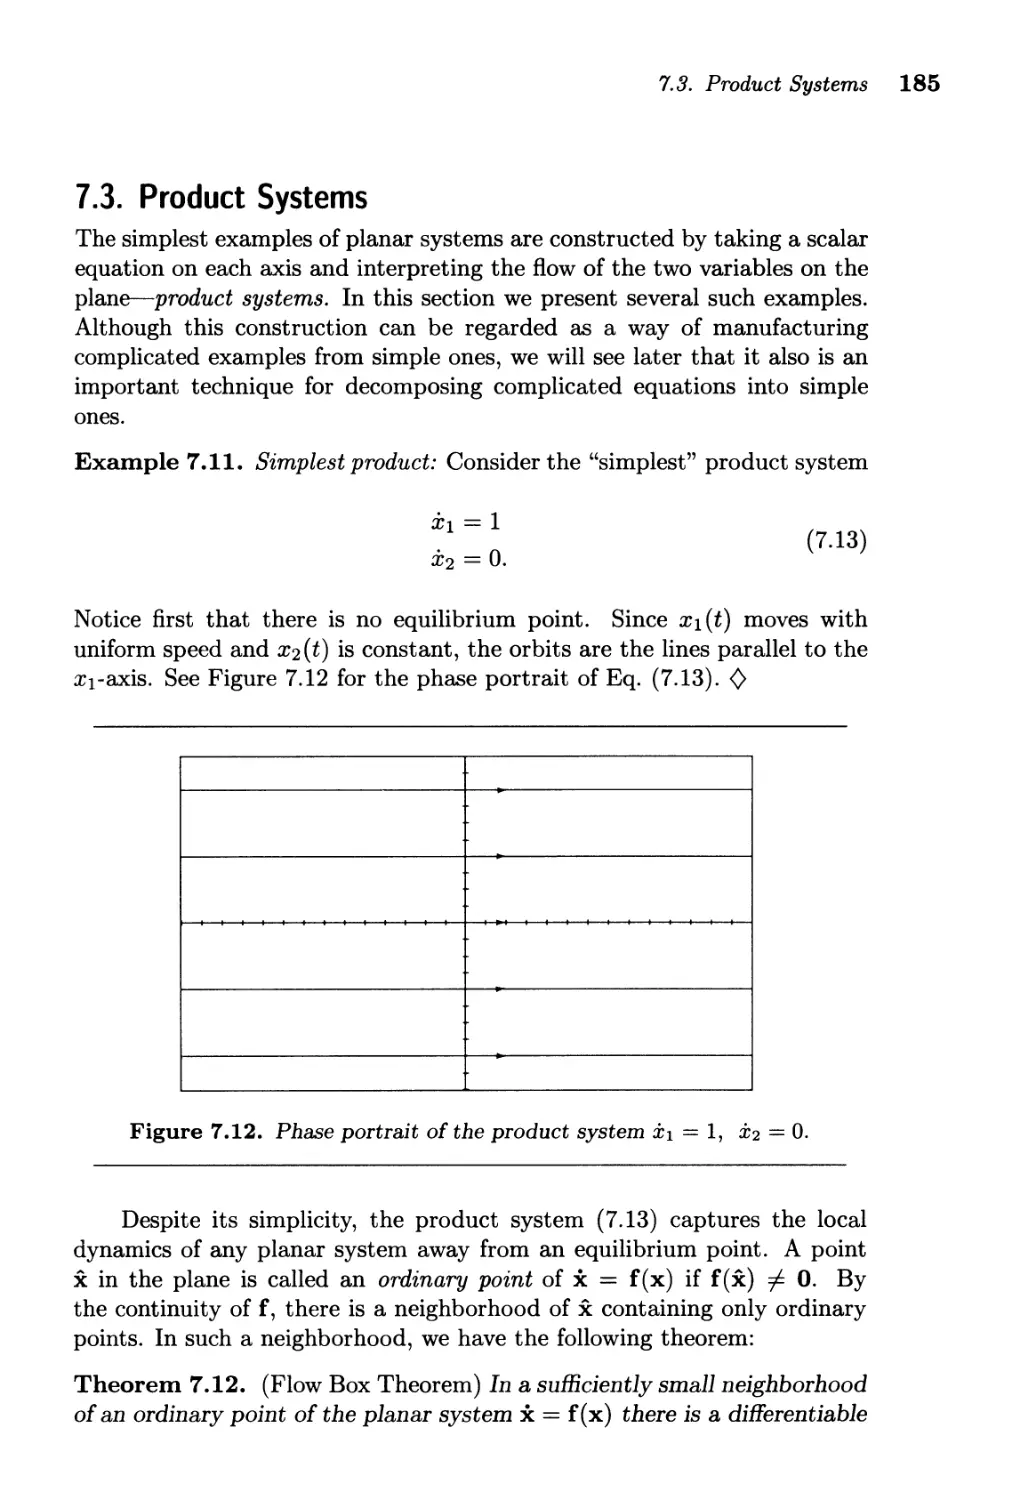 7.3. Product Systems